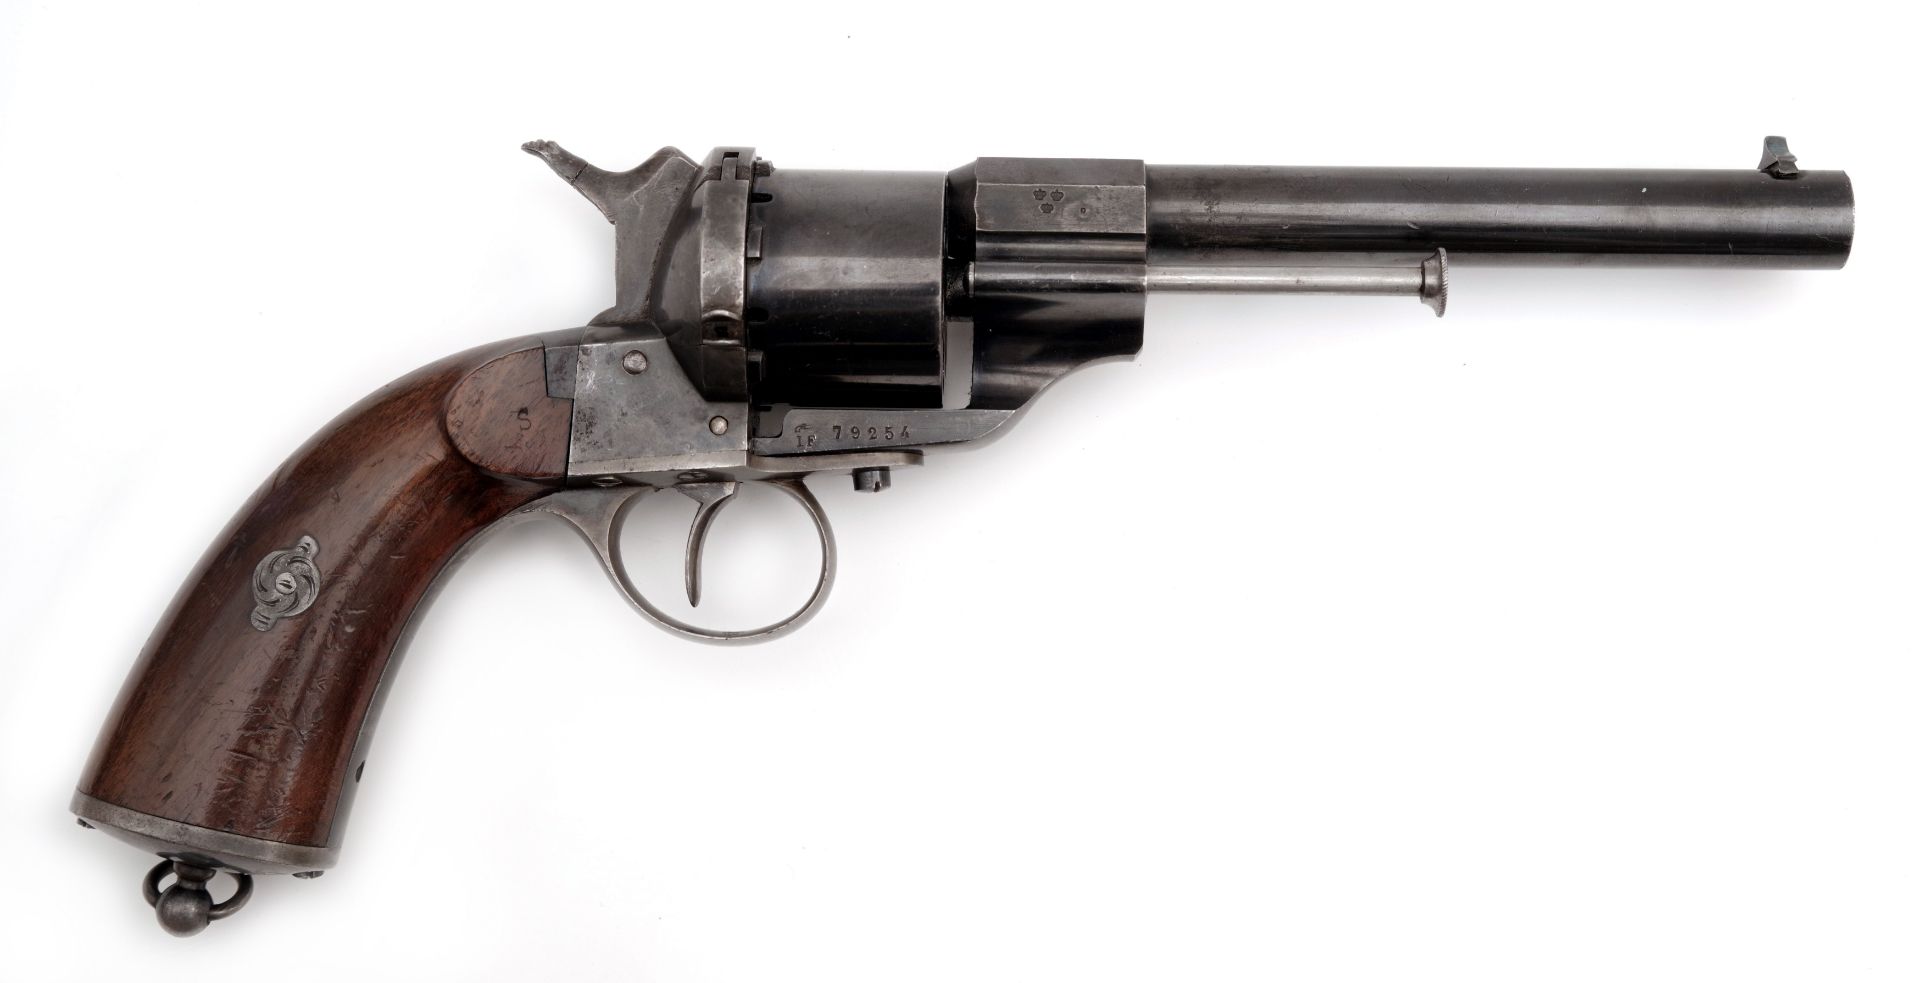 A Sweden Army/Navy Model 1863-79 Revolver by E. LEFAUCHEUX (converted into central fire)